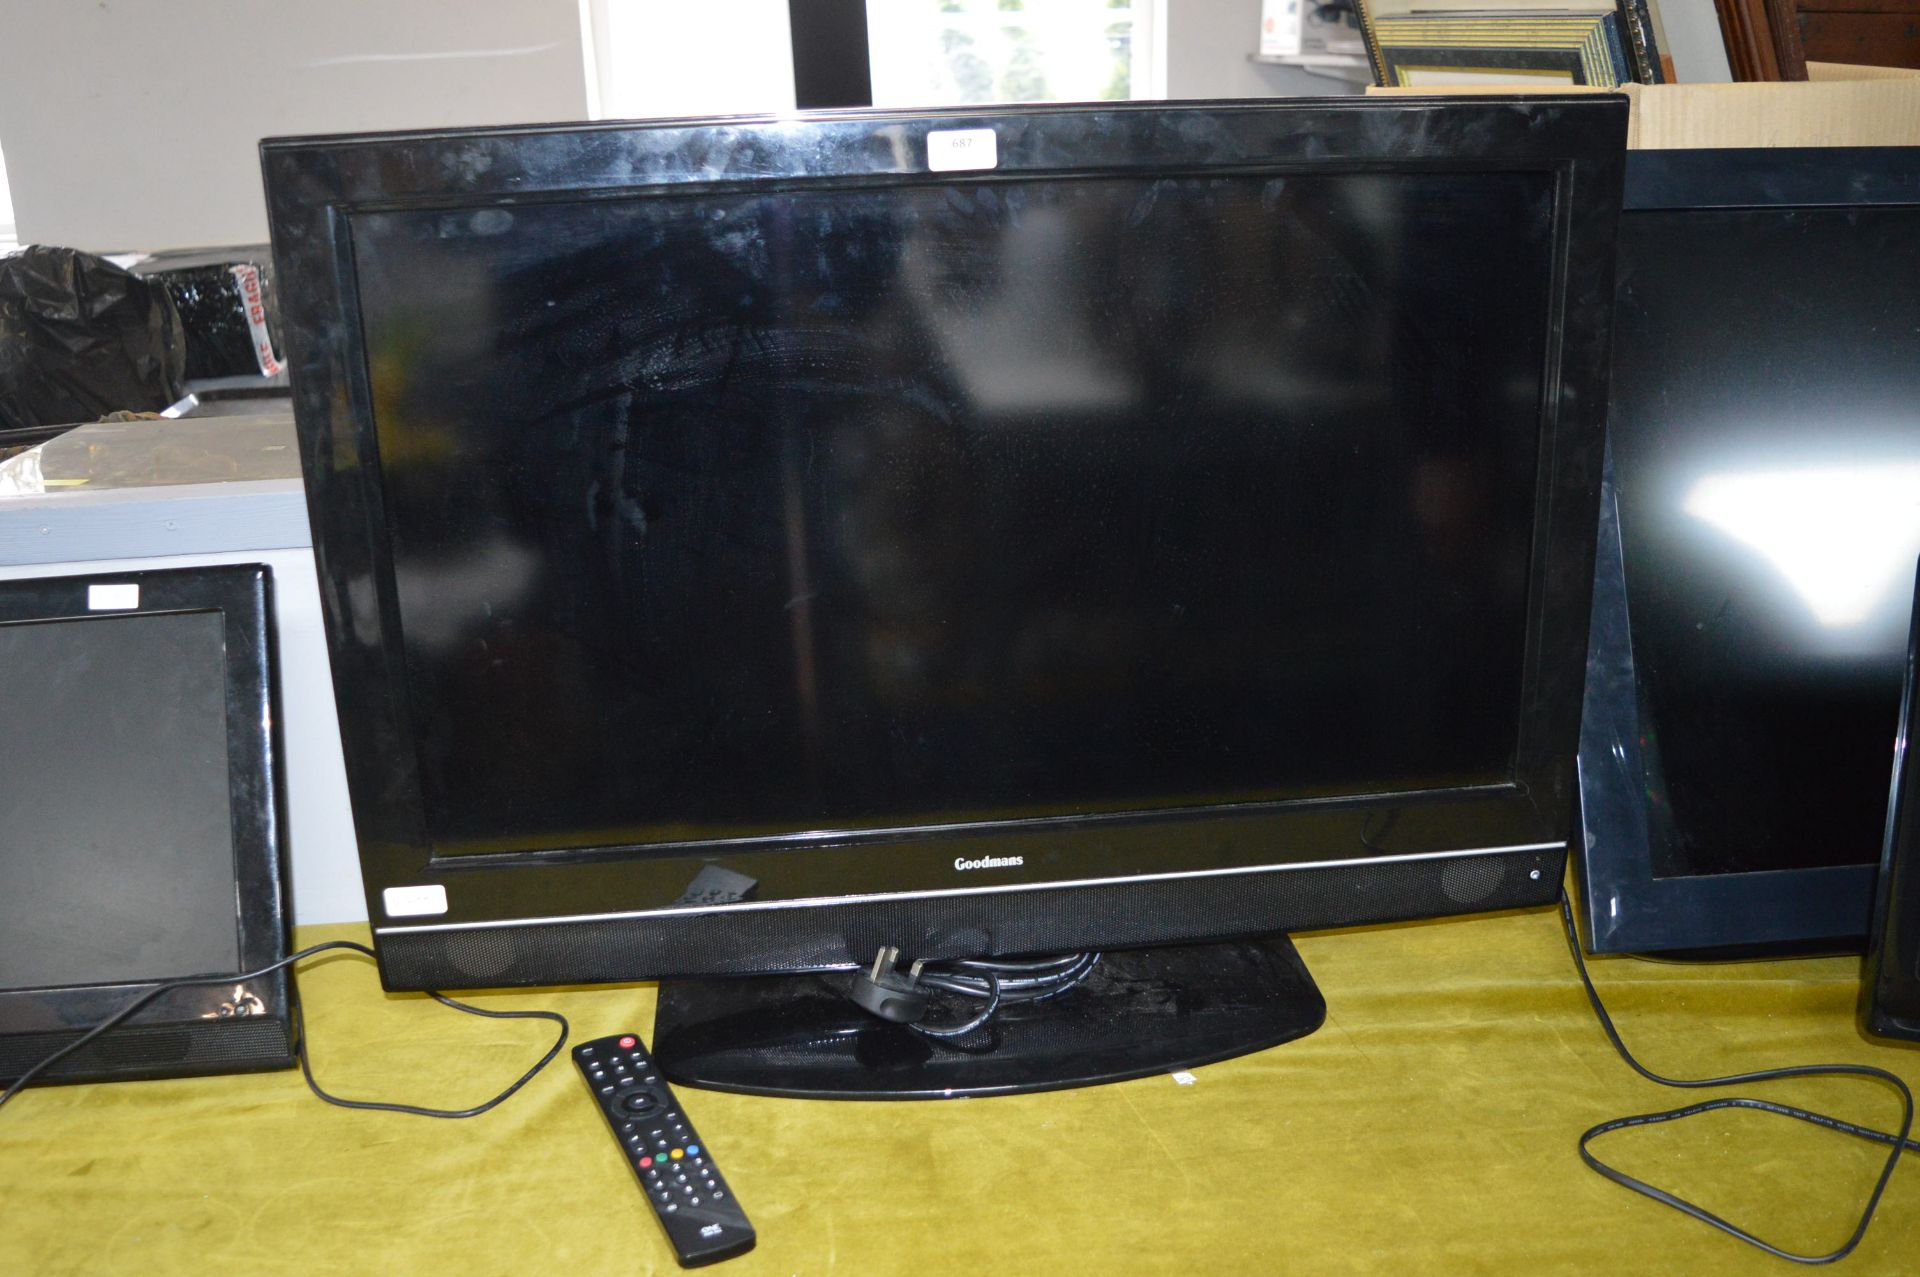 Goodmans 31" TV with Remote